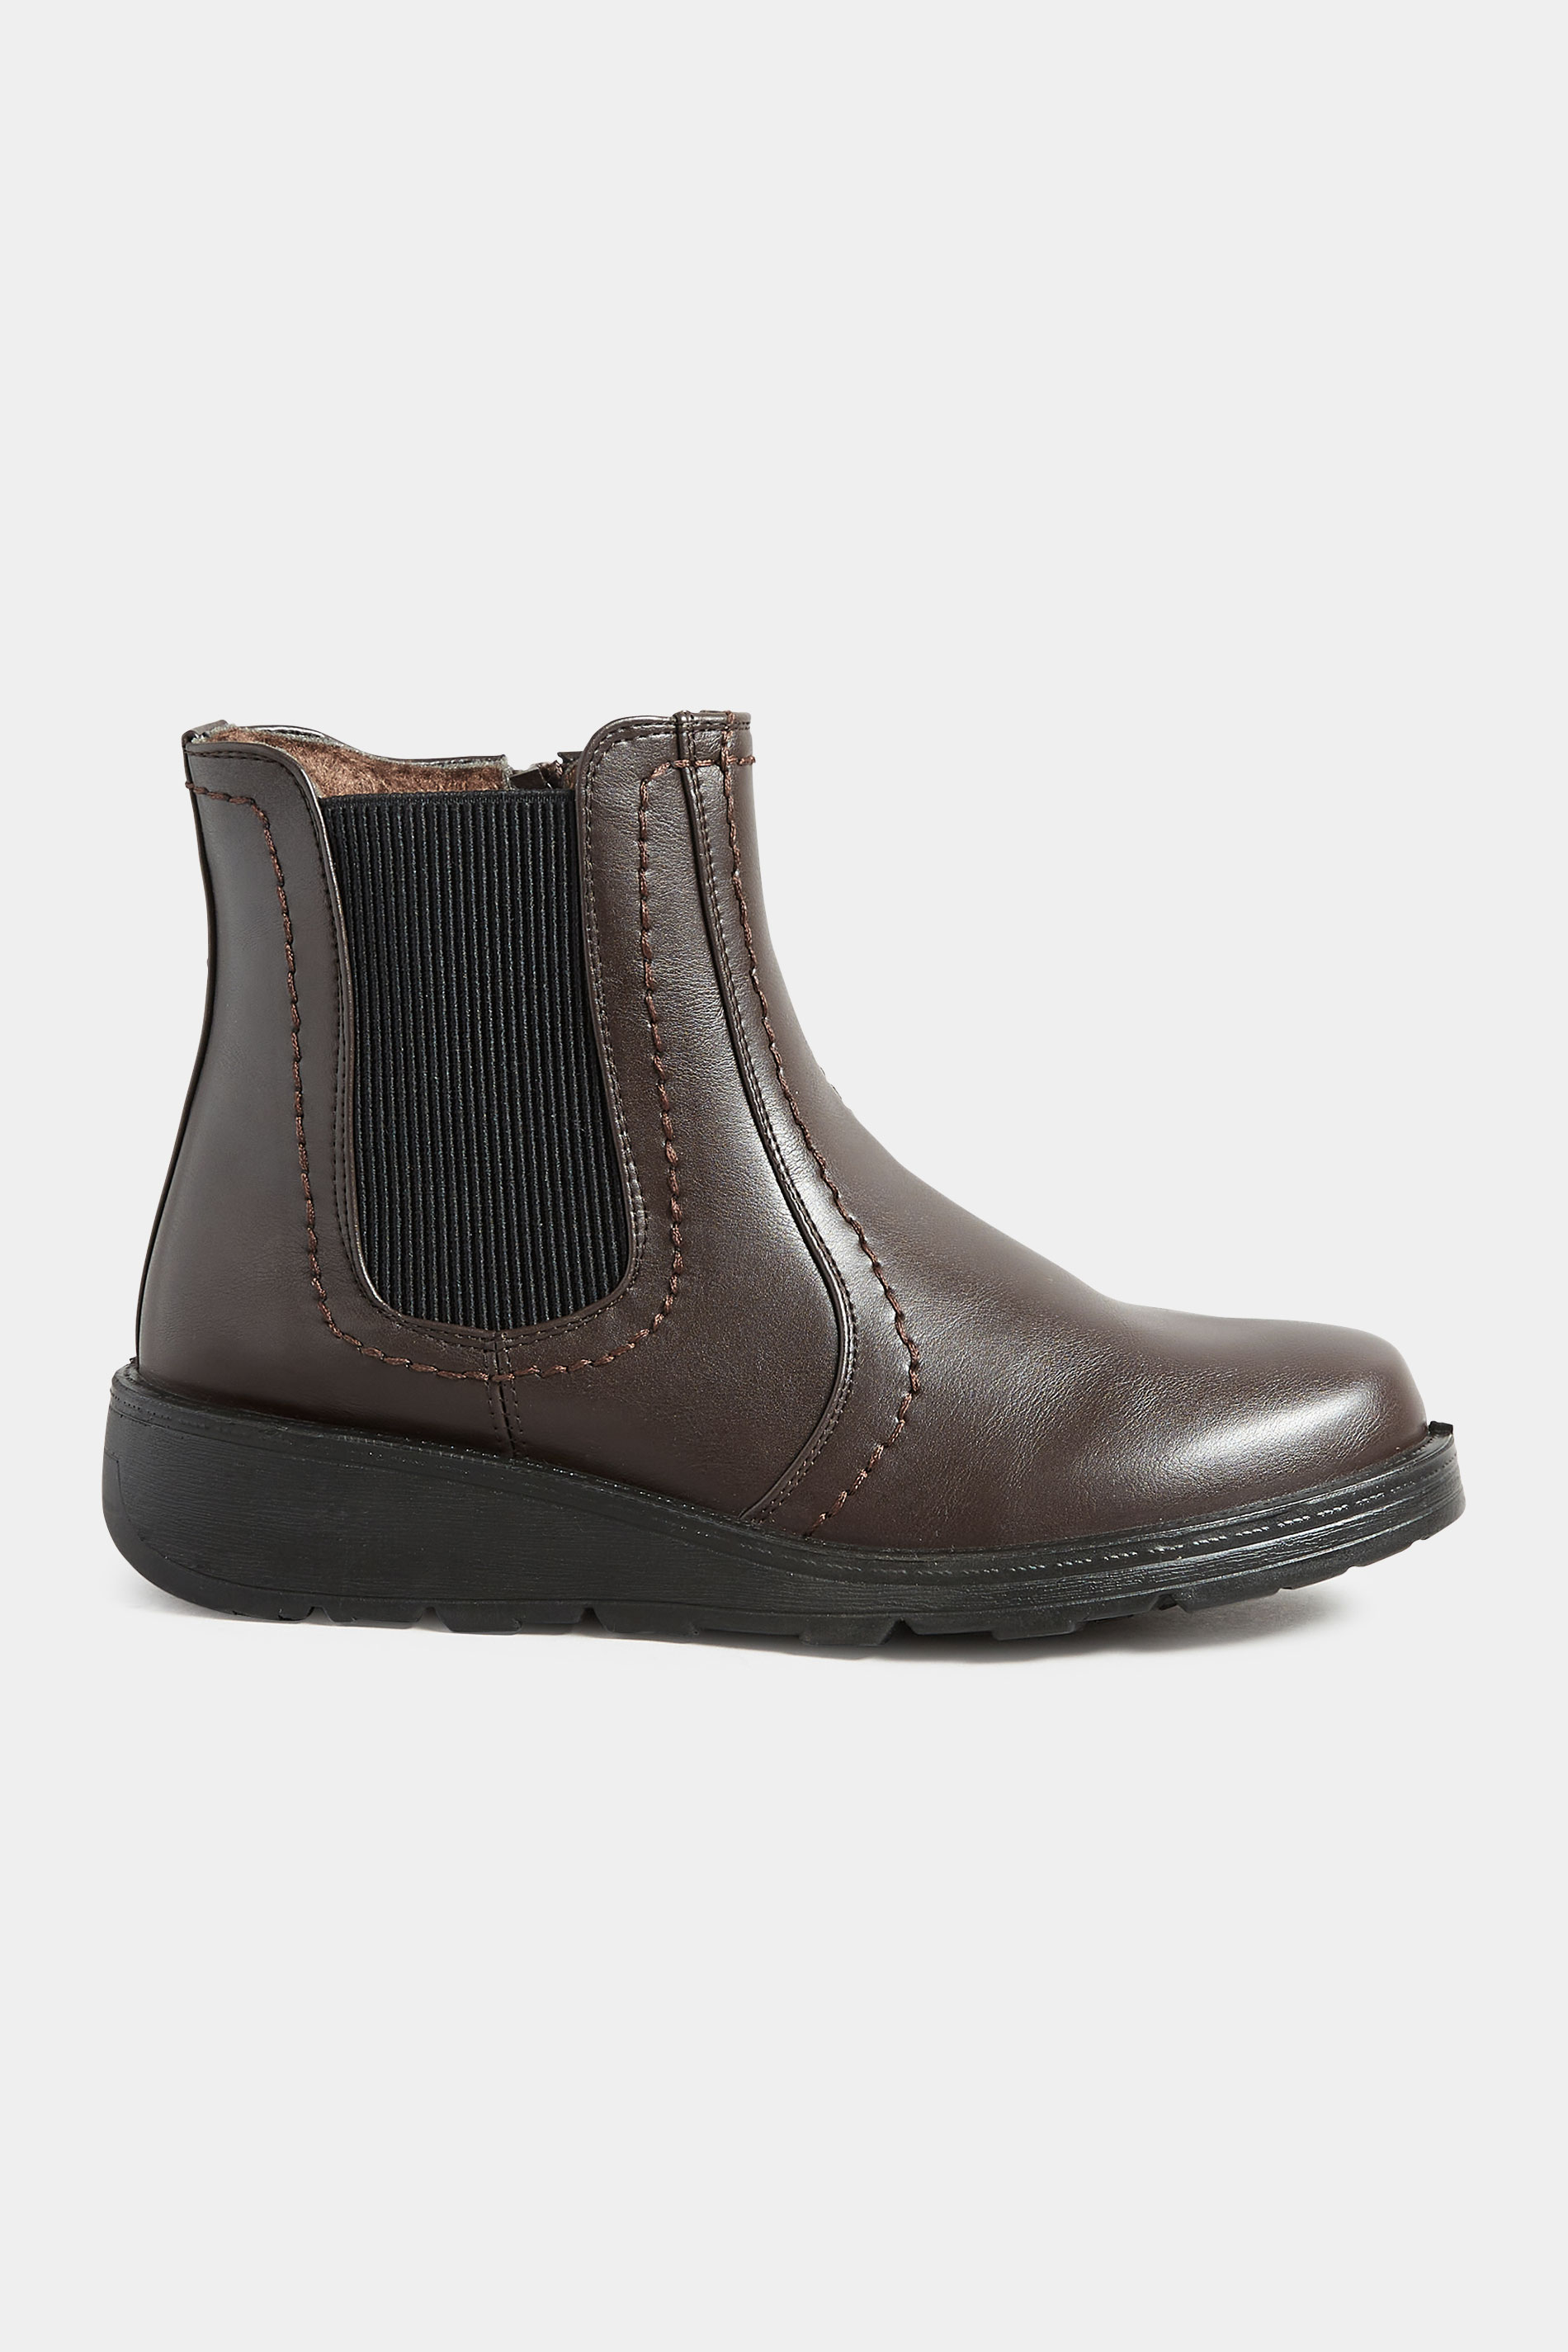 Brown Wedge Chelsea Boots In Extra Wide EEE Fit | Yours Clothing 3